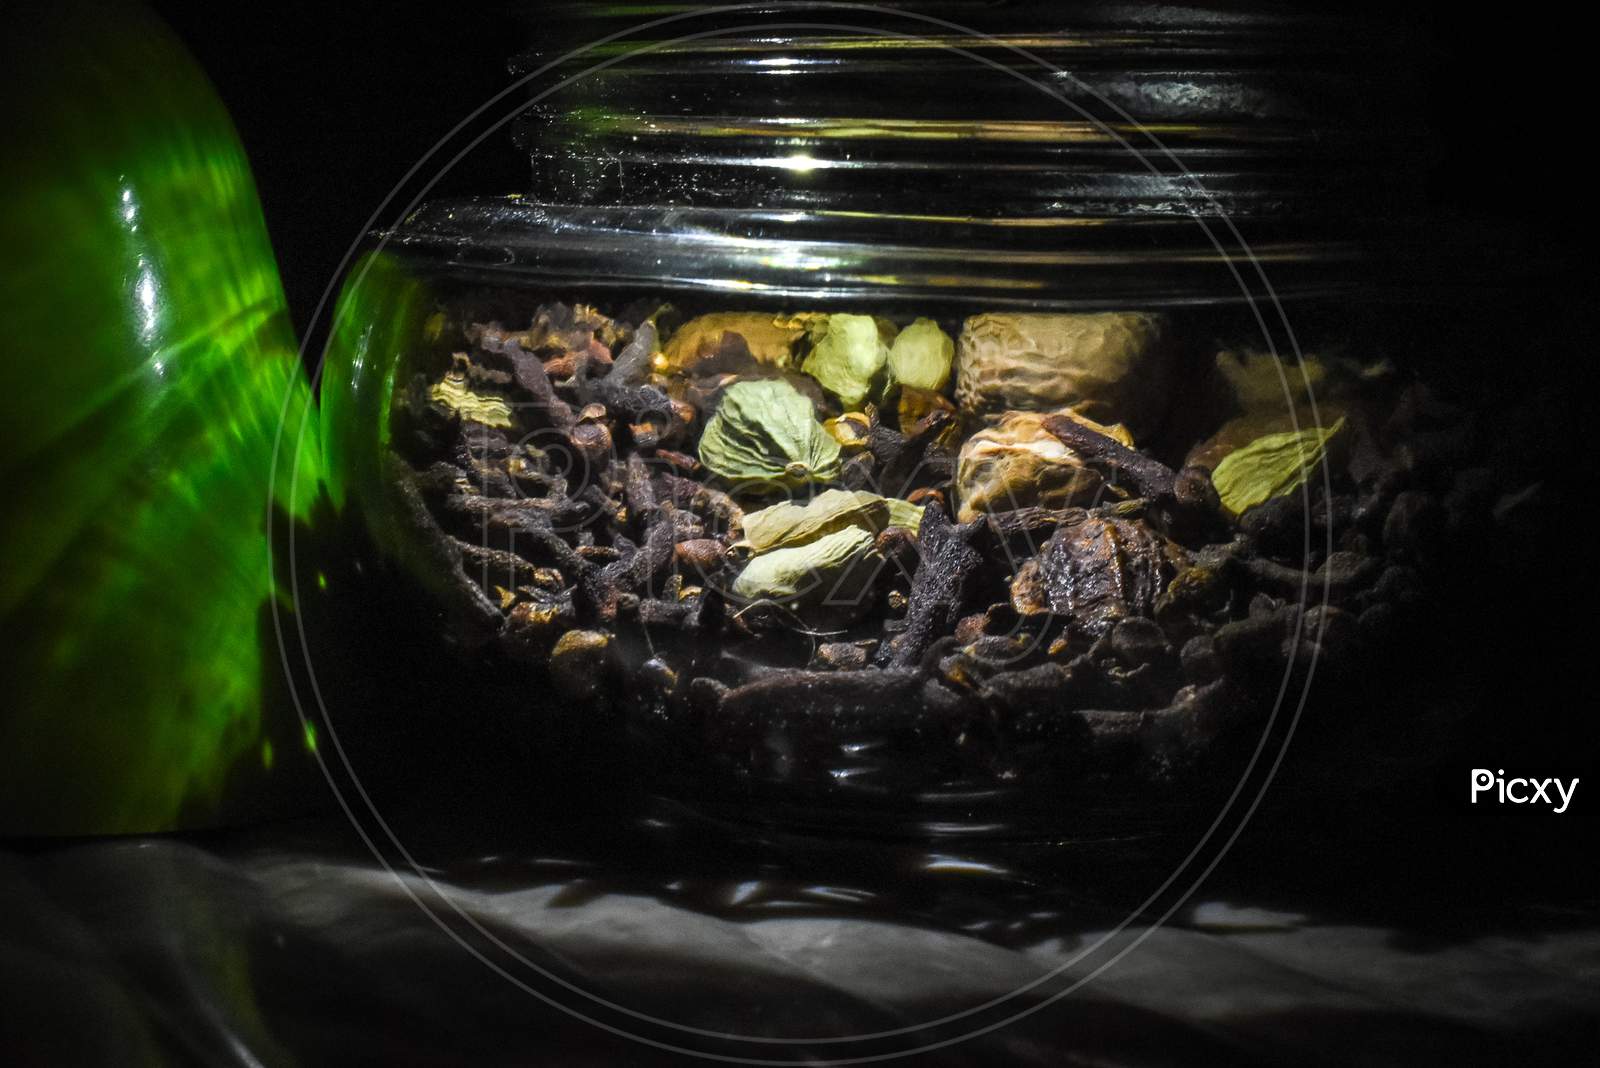 Some ingredients like cloves, cardamom and nutmeg in the glass pot